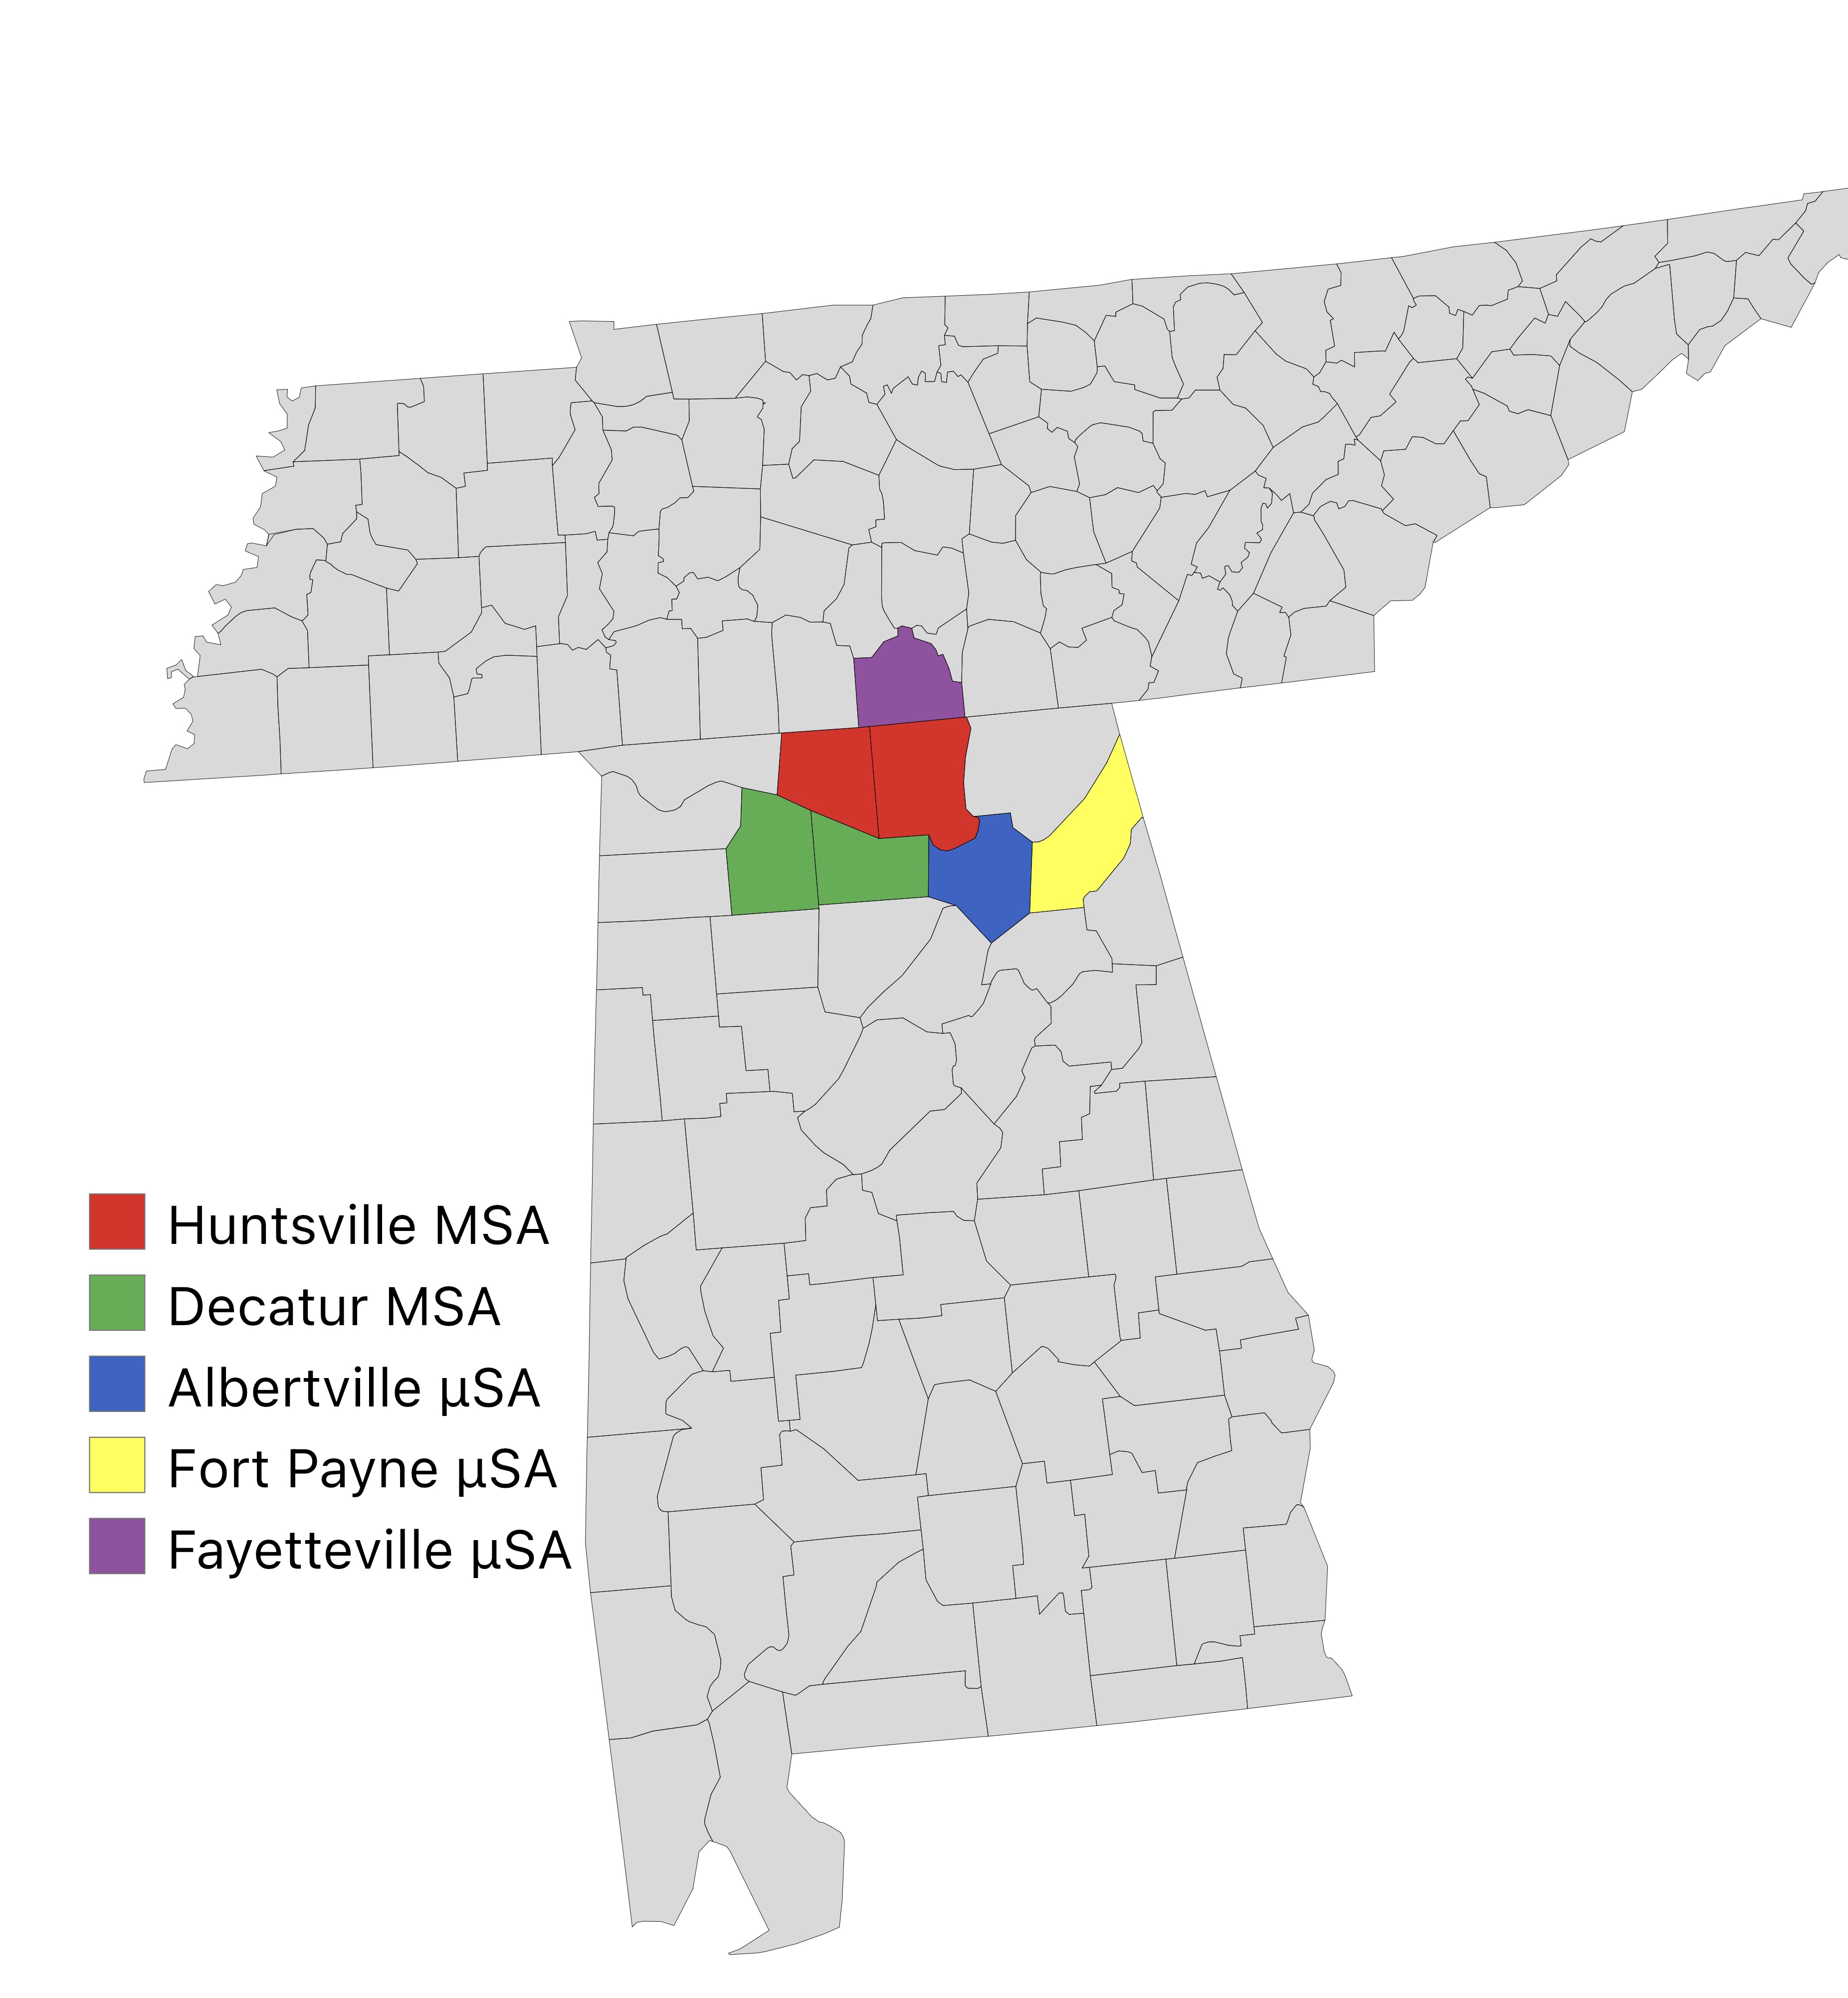 The Huntsville-Decatur-Albertville, AL Combined Statistical Area is the most populated sub-region of North Alabama, and is the second largest Combined Statistical Area in the State of Alabama after Birmingham. The Huntsville-Decatur-Albertville  CSA had a total of 879,315 people in 2022 and ranks 68th in the country.The CSA is situated along the Tennessee River, and is made up of two separate metropolitan areas (Decatur and Huntsville) and 3 Micropolitan areas ( Albertville, Fort Payne, and Fayetteville) that are usually referred to as one. The Decatur MSA, Albertville µSA, and Fort Payne µSA are south of the Tennessee River and the Huntsville MSA and Fayetteville µSA are north of it.
Significant cities included in the CSA include Albertville, Arab, Athens, Boaz, Decatur, Fayetteville, Fort Payne, Guntersville, Hartselle, Huntsville, and Madison, as well as DeKalb, Lawrence, Limestone, Lincoln, Madison, Marshall, and Morgan counties.
Huntsville is the largest city in the area with a population of 215,006 people, and a metro population of 502,728. Decatur is the second largest city with a population of 57,938 people, and a metro population of 156,758. Mooresville is the smallest town in the CSA with 47 people.